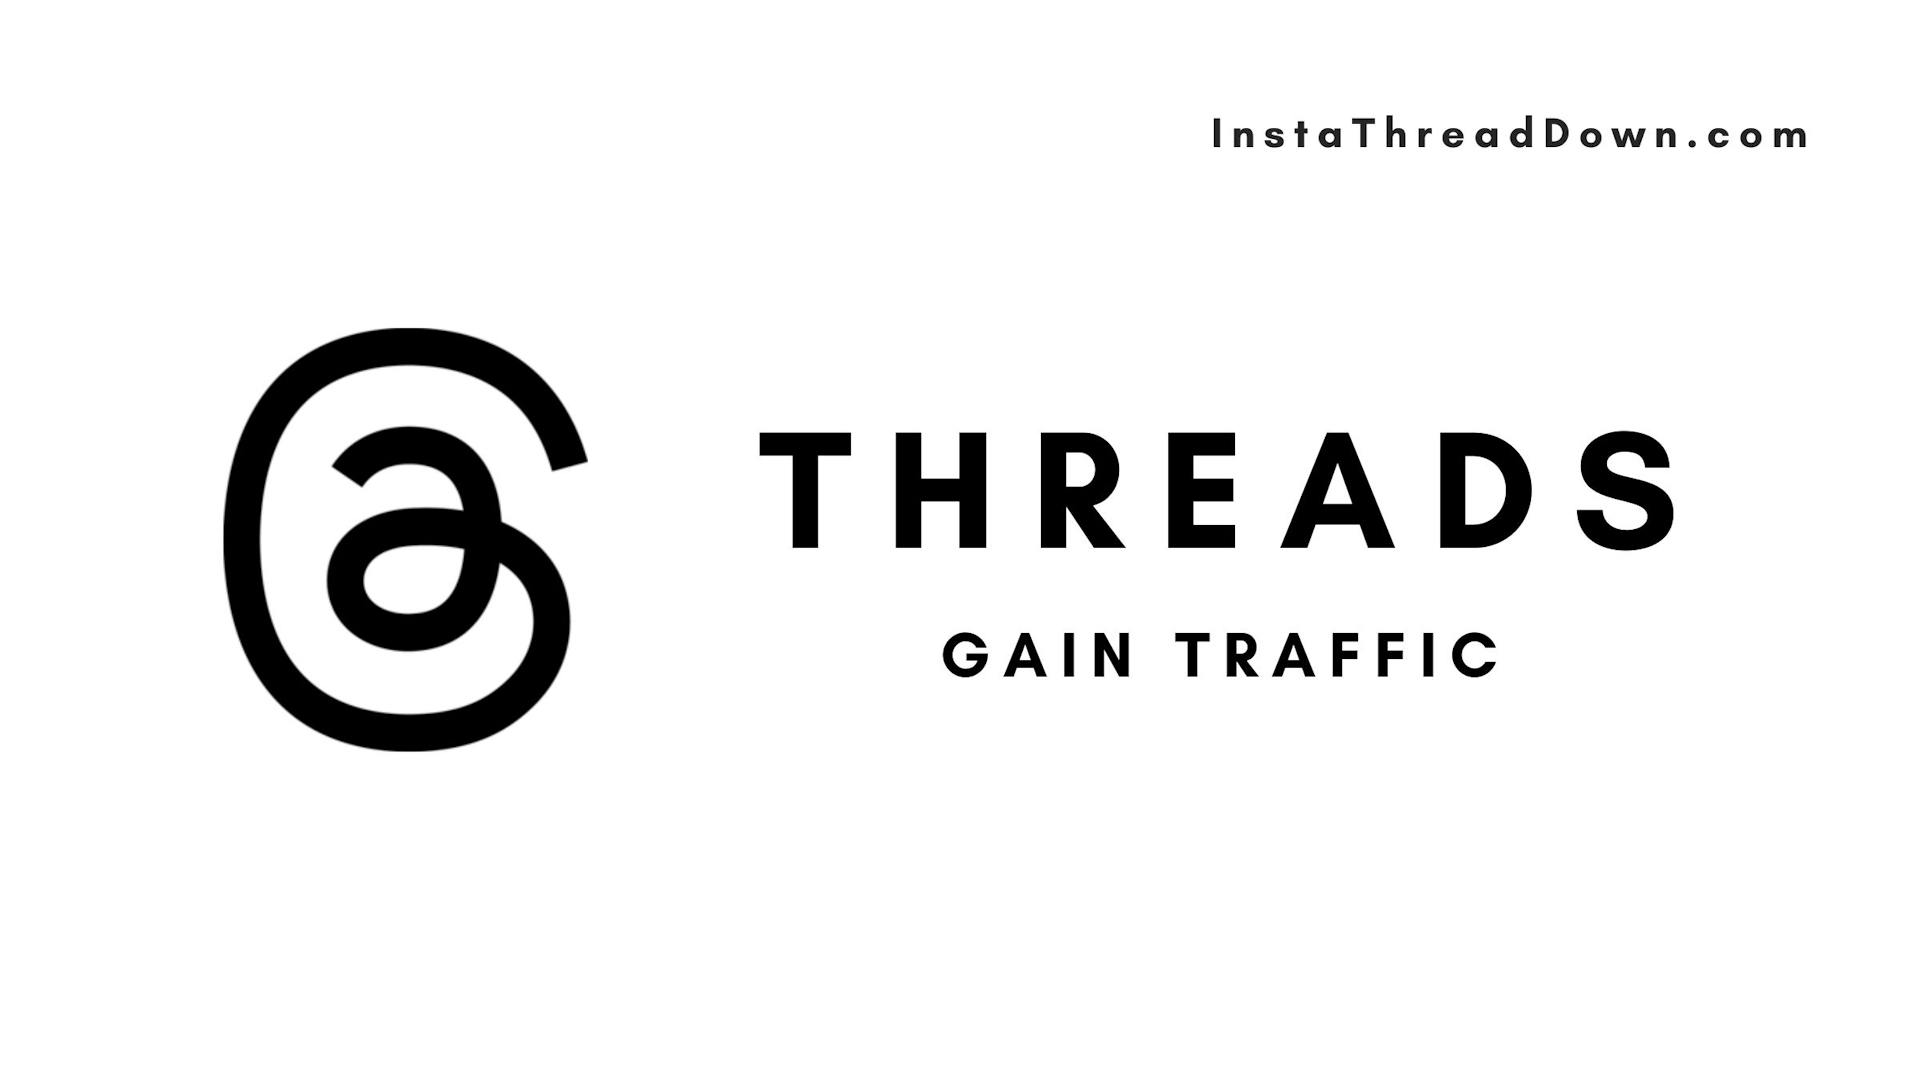 How to Drive Traffic From Threads to Your Website